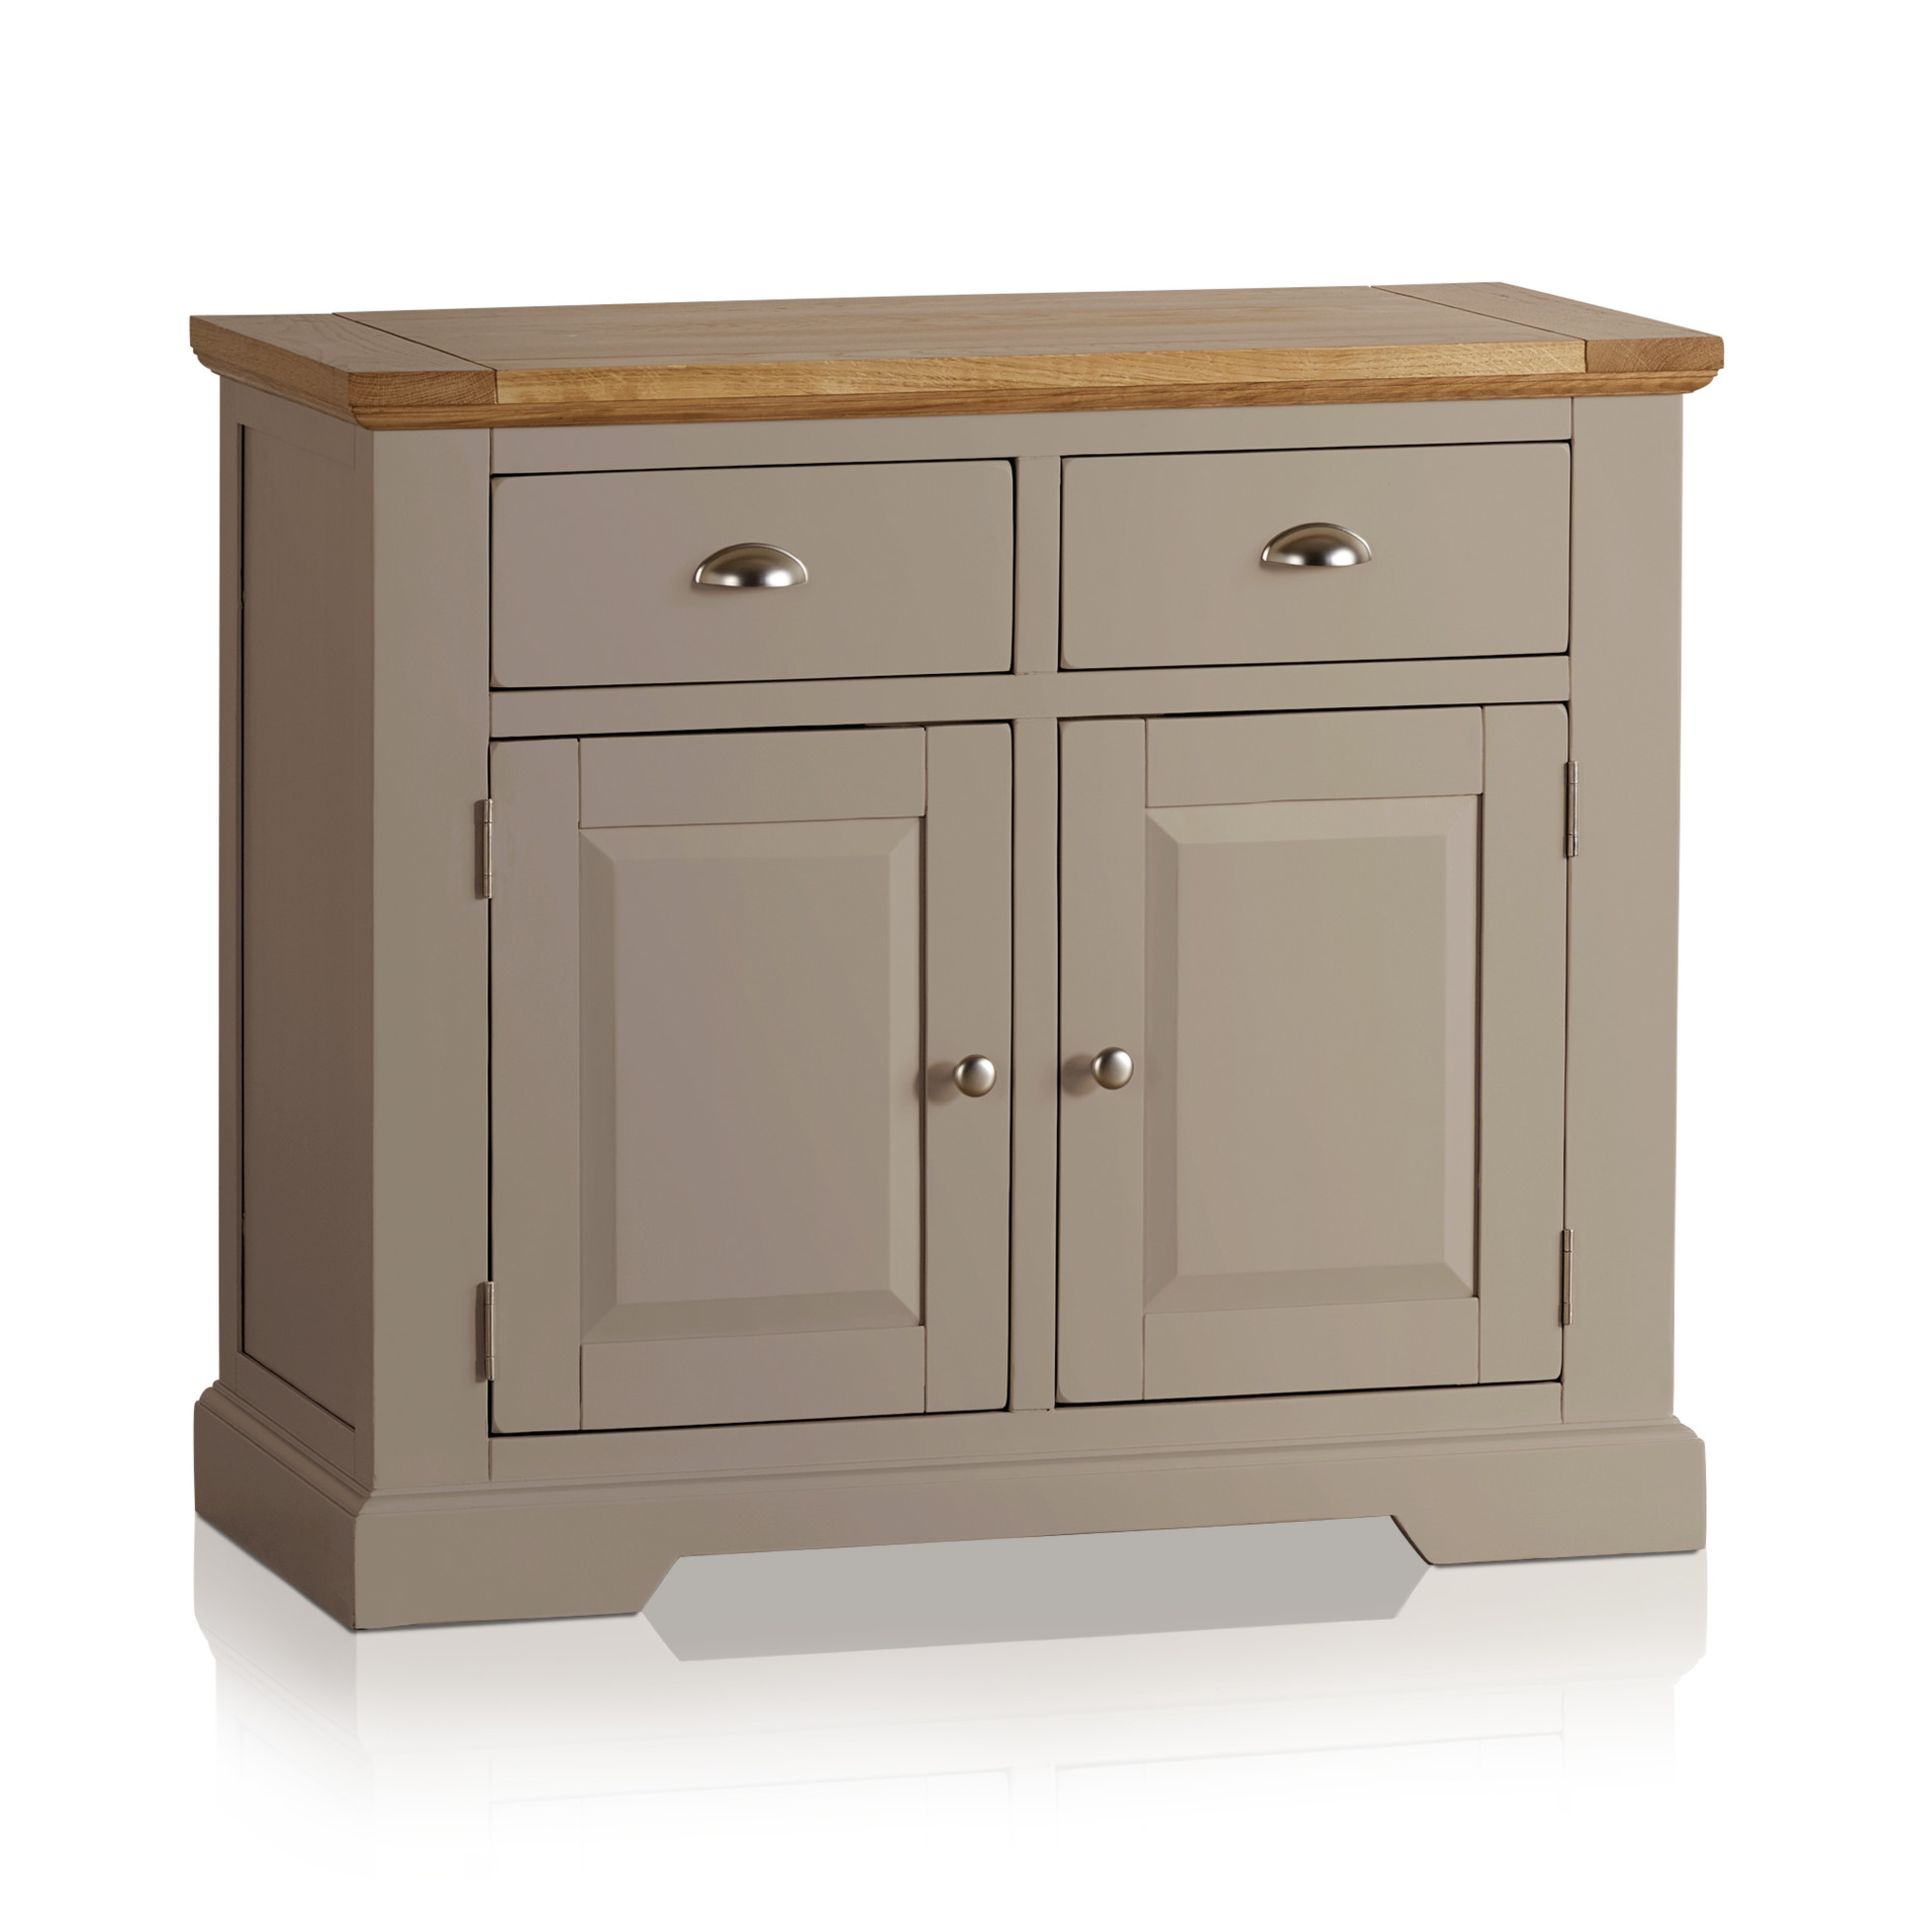 Oak Furnitureland St Ives Natural Oak And Light Grey Painted Small Sideboard RRP ¶œ369.99